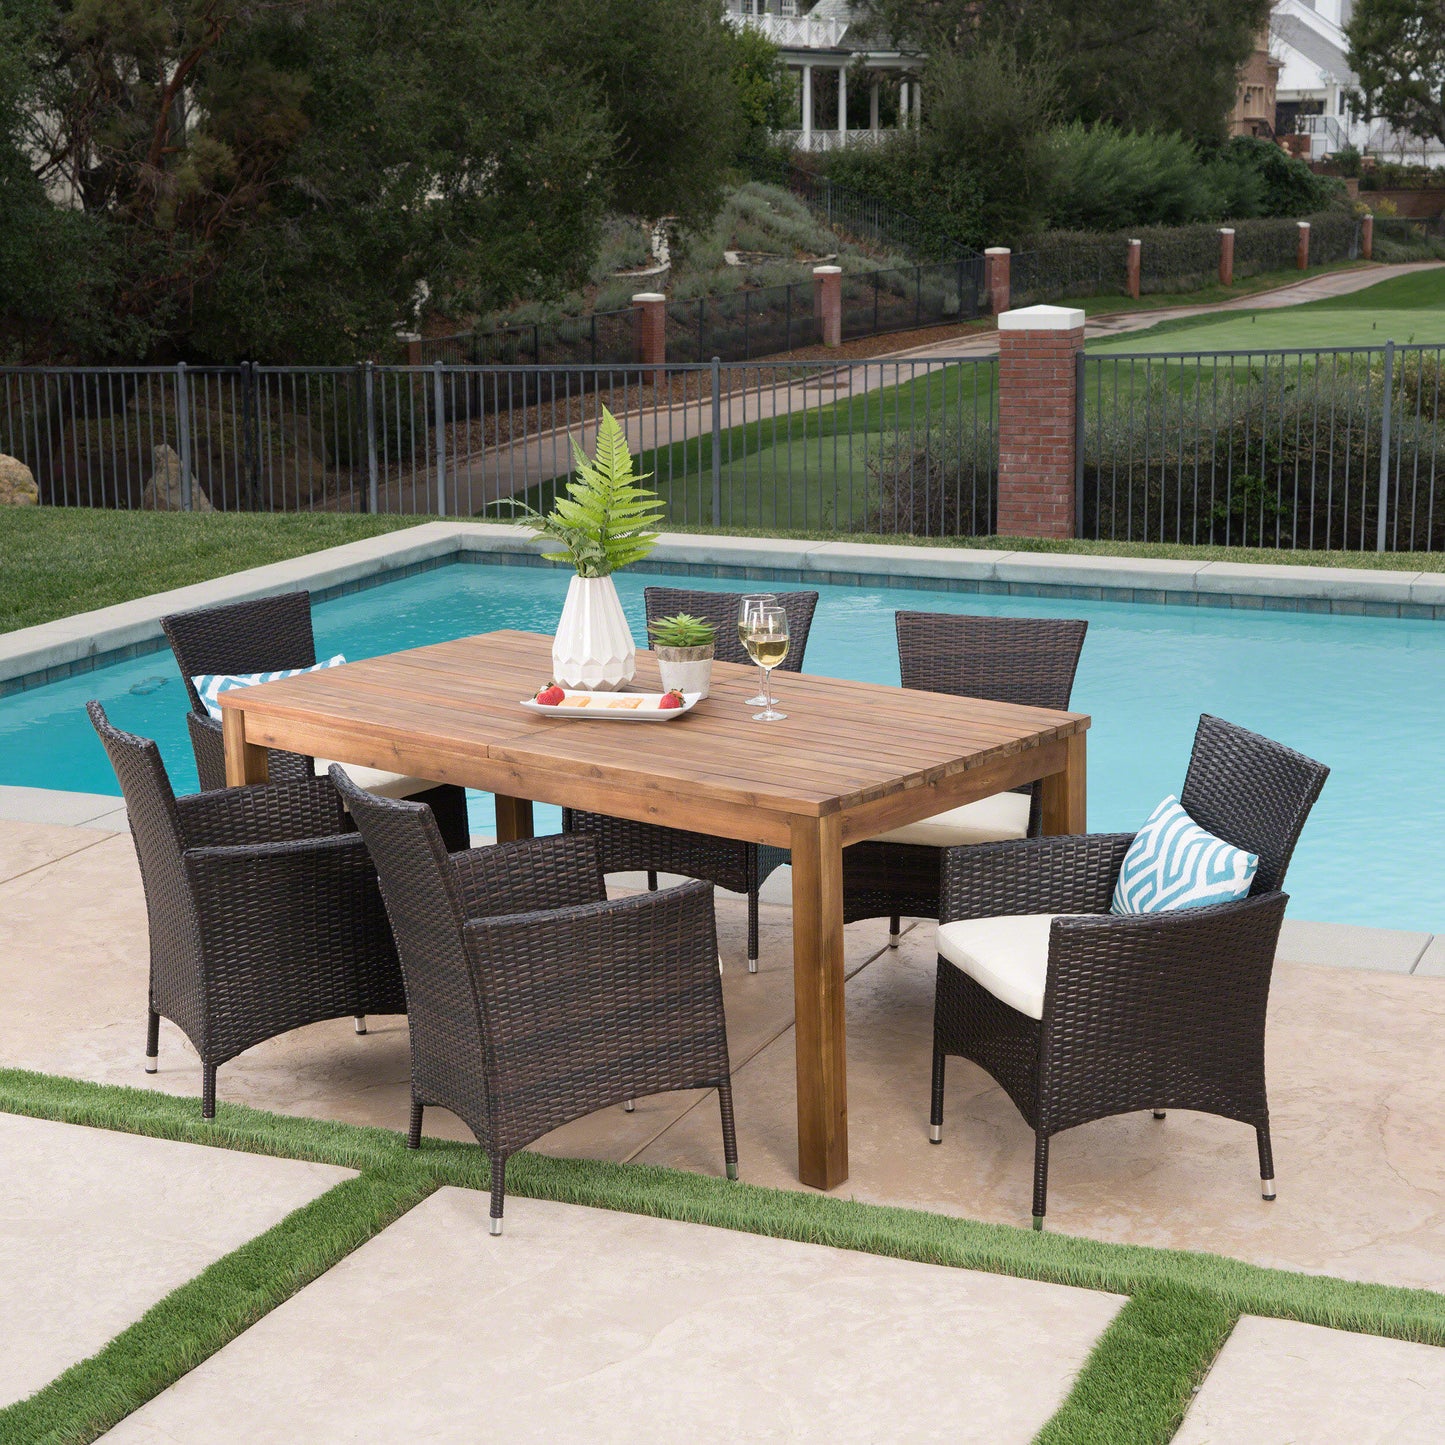 Lorelei Outdoor 7 Piece Wicker Dining Set with Expandable Dining Table